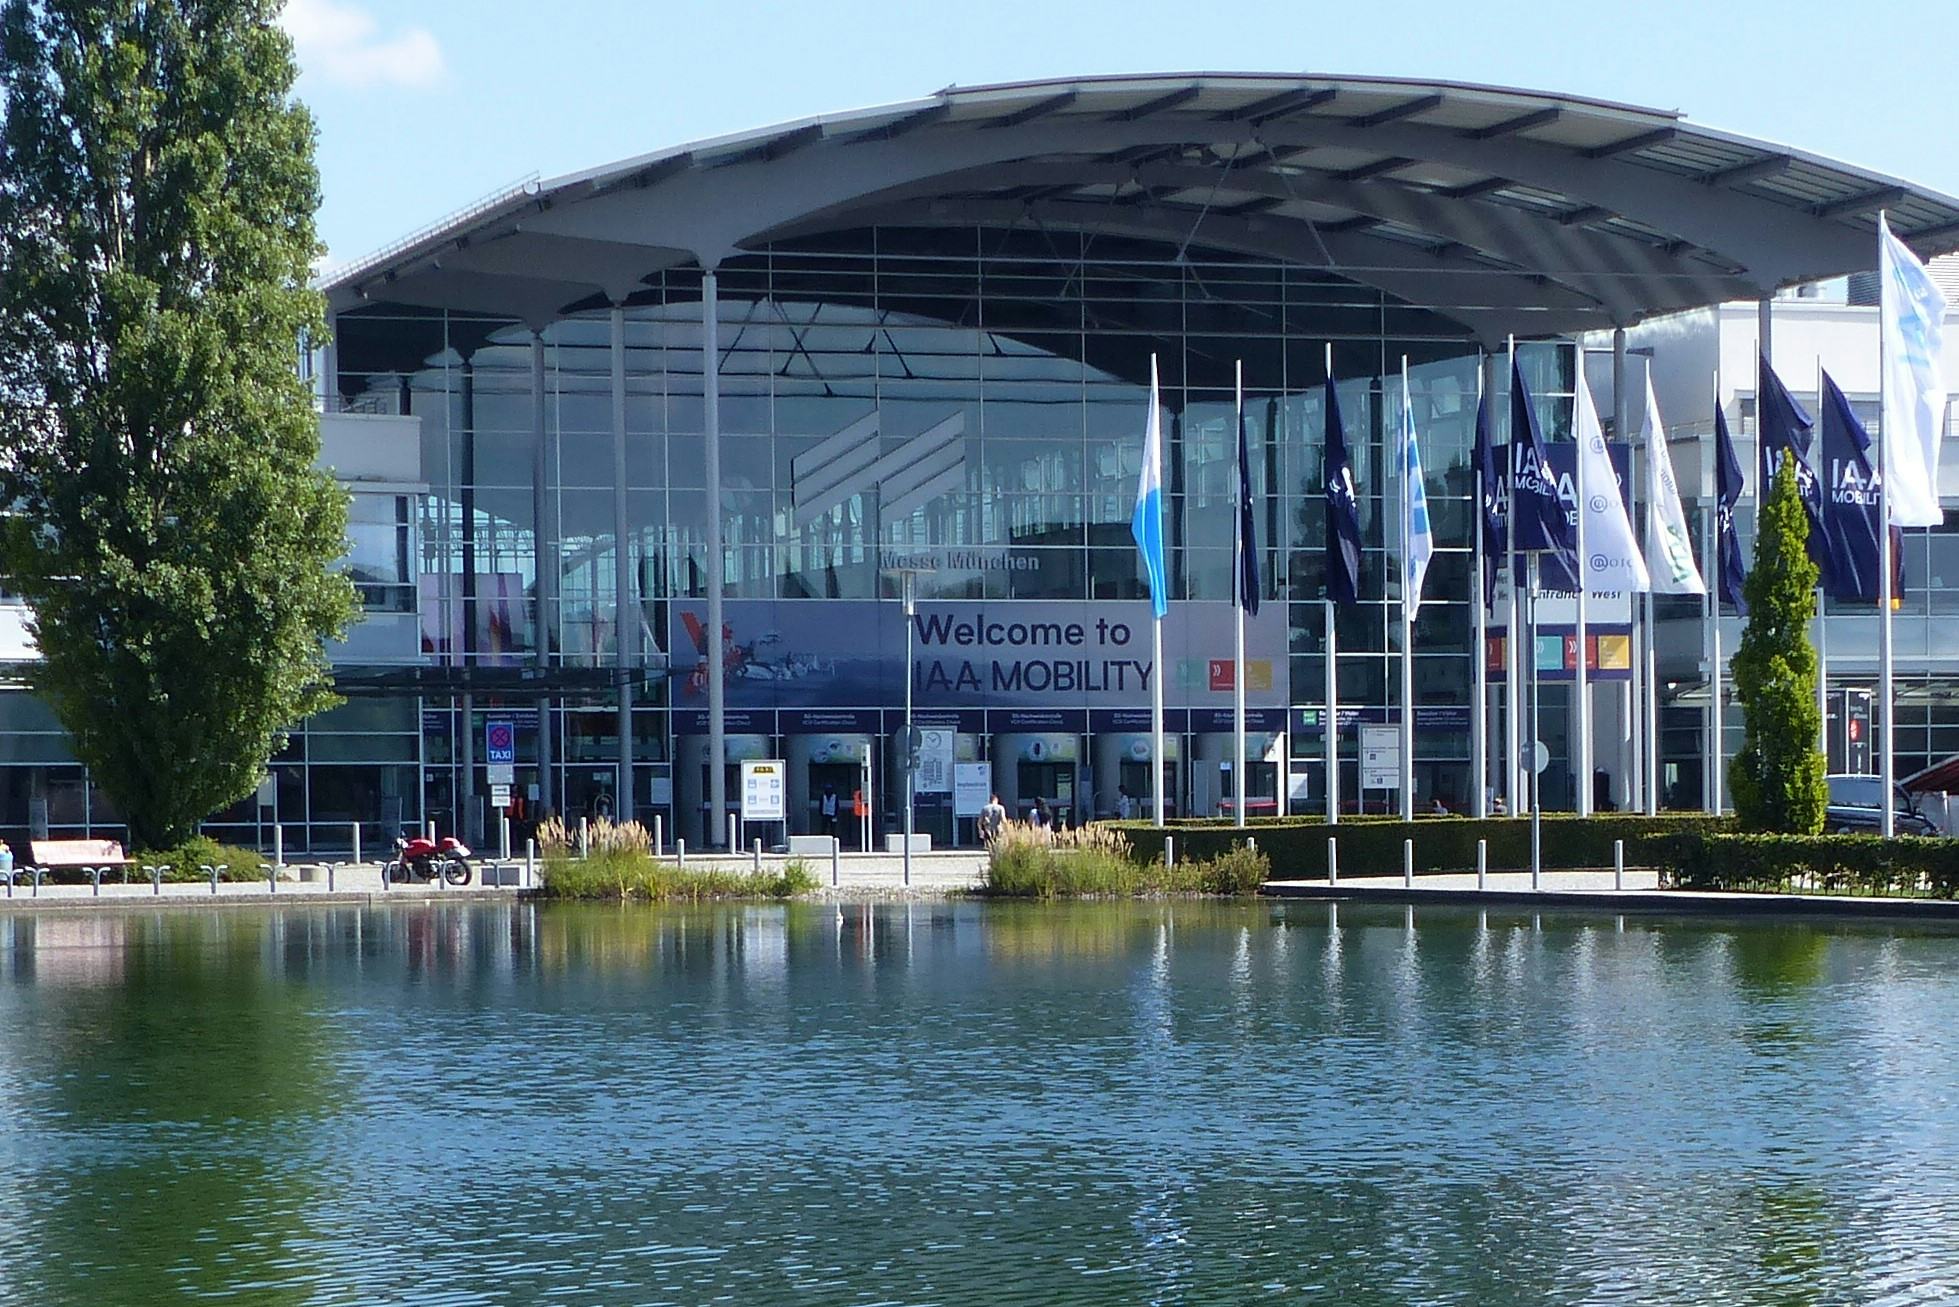 Today IAA Mobility opened its doors and will take place from September 7 to 12. – Photo Bike Europe